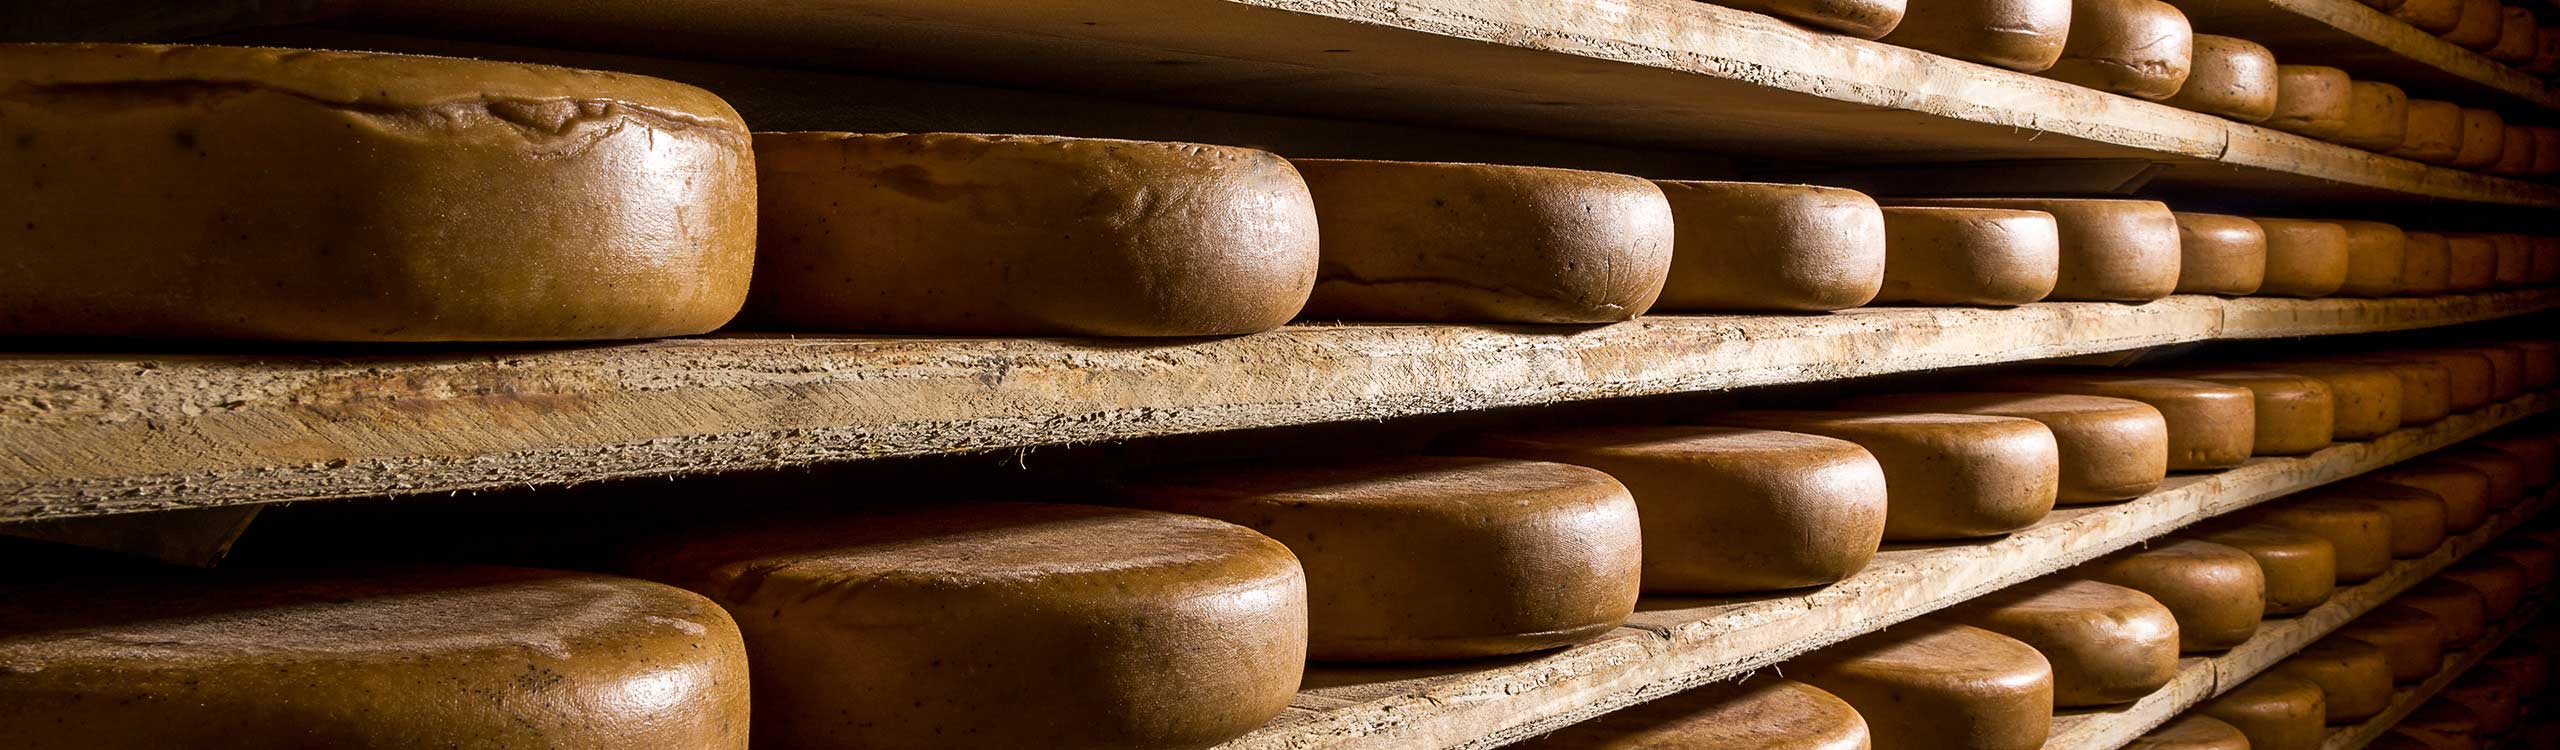 aged cheeses